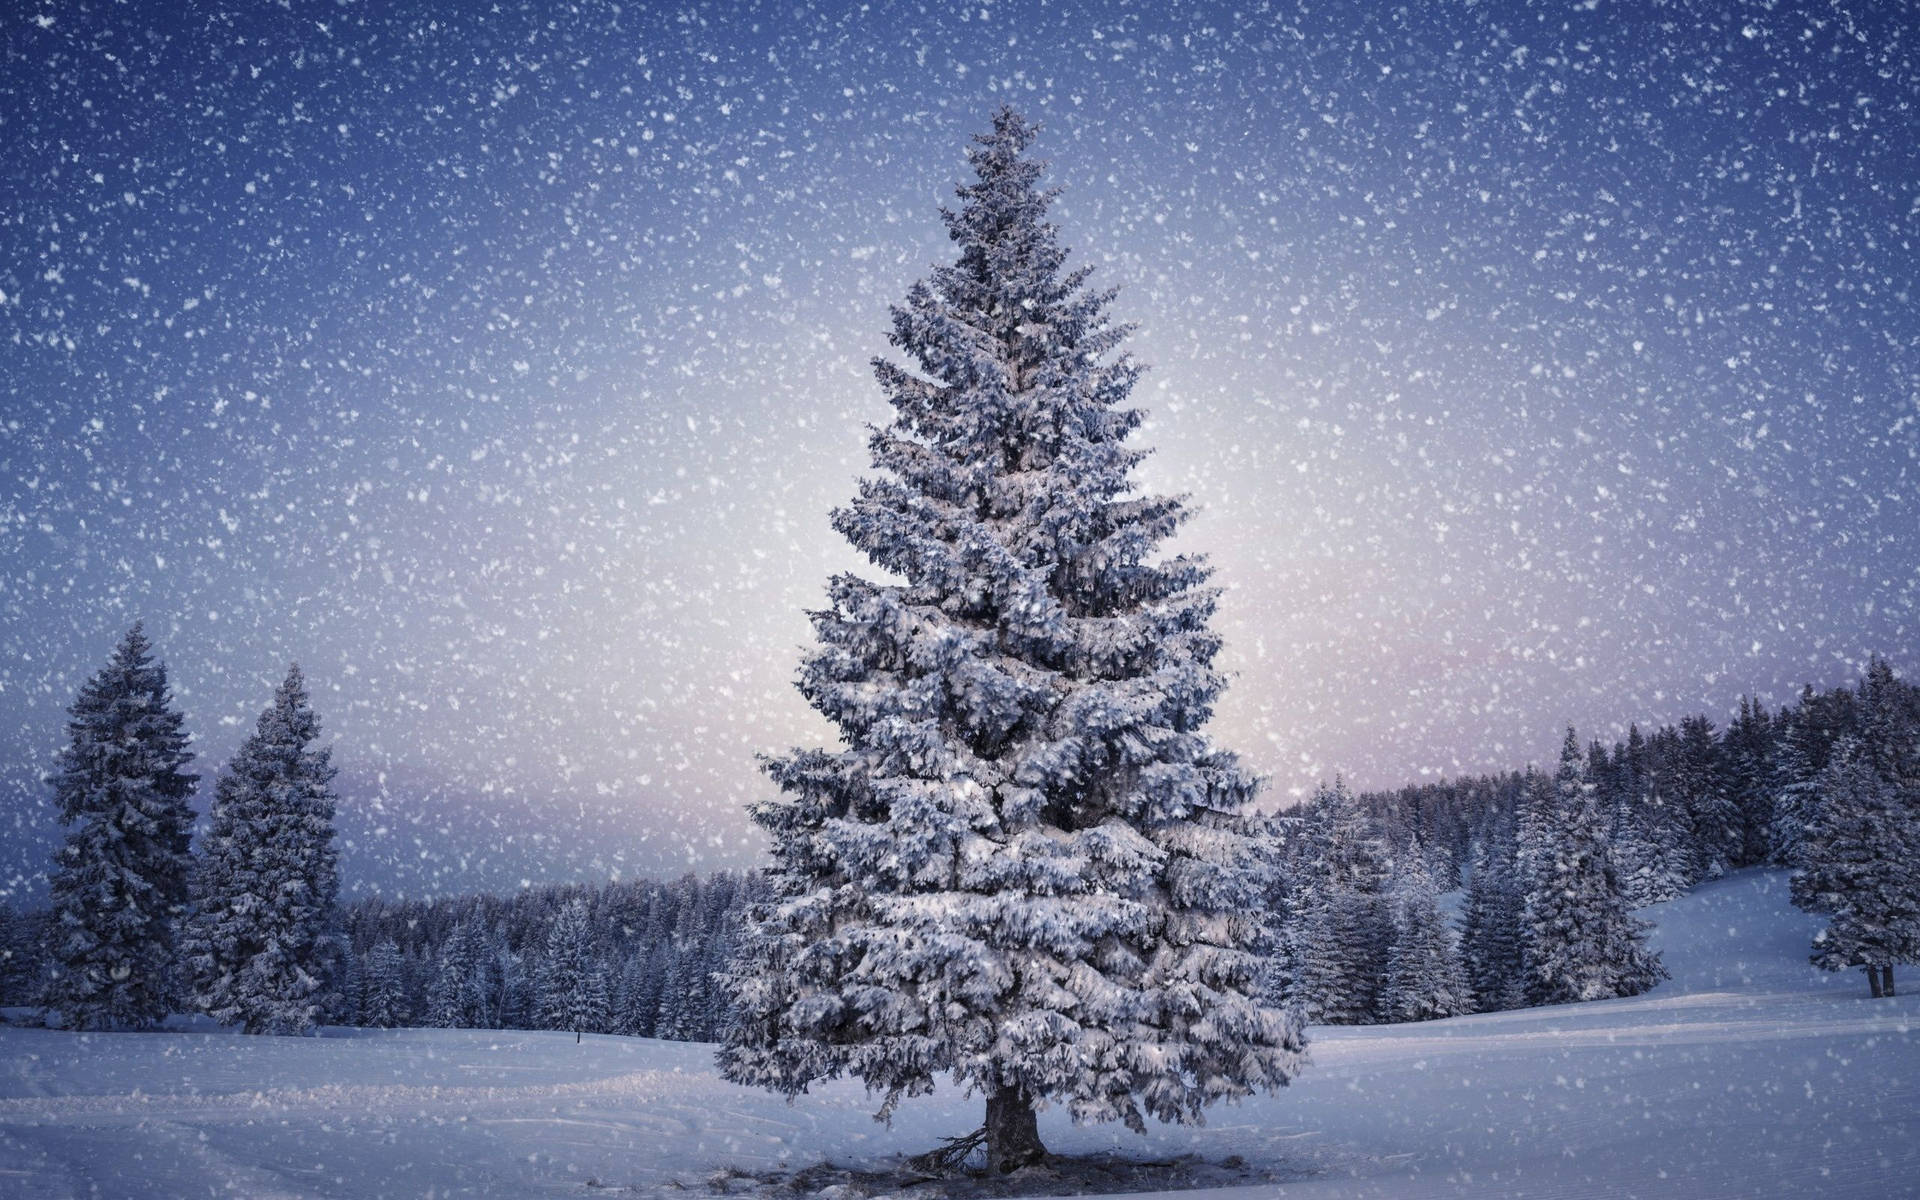 A snowy winter wonderland with a majestic Christmas tree Wallpaper